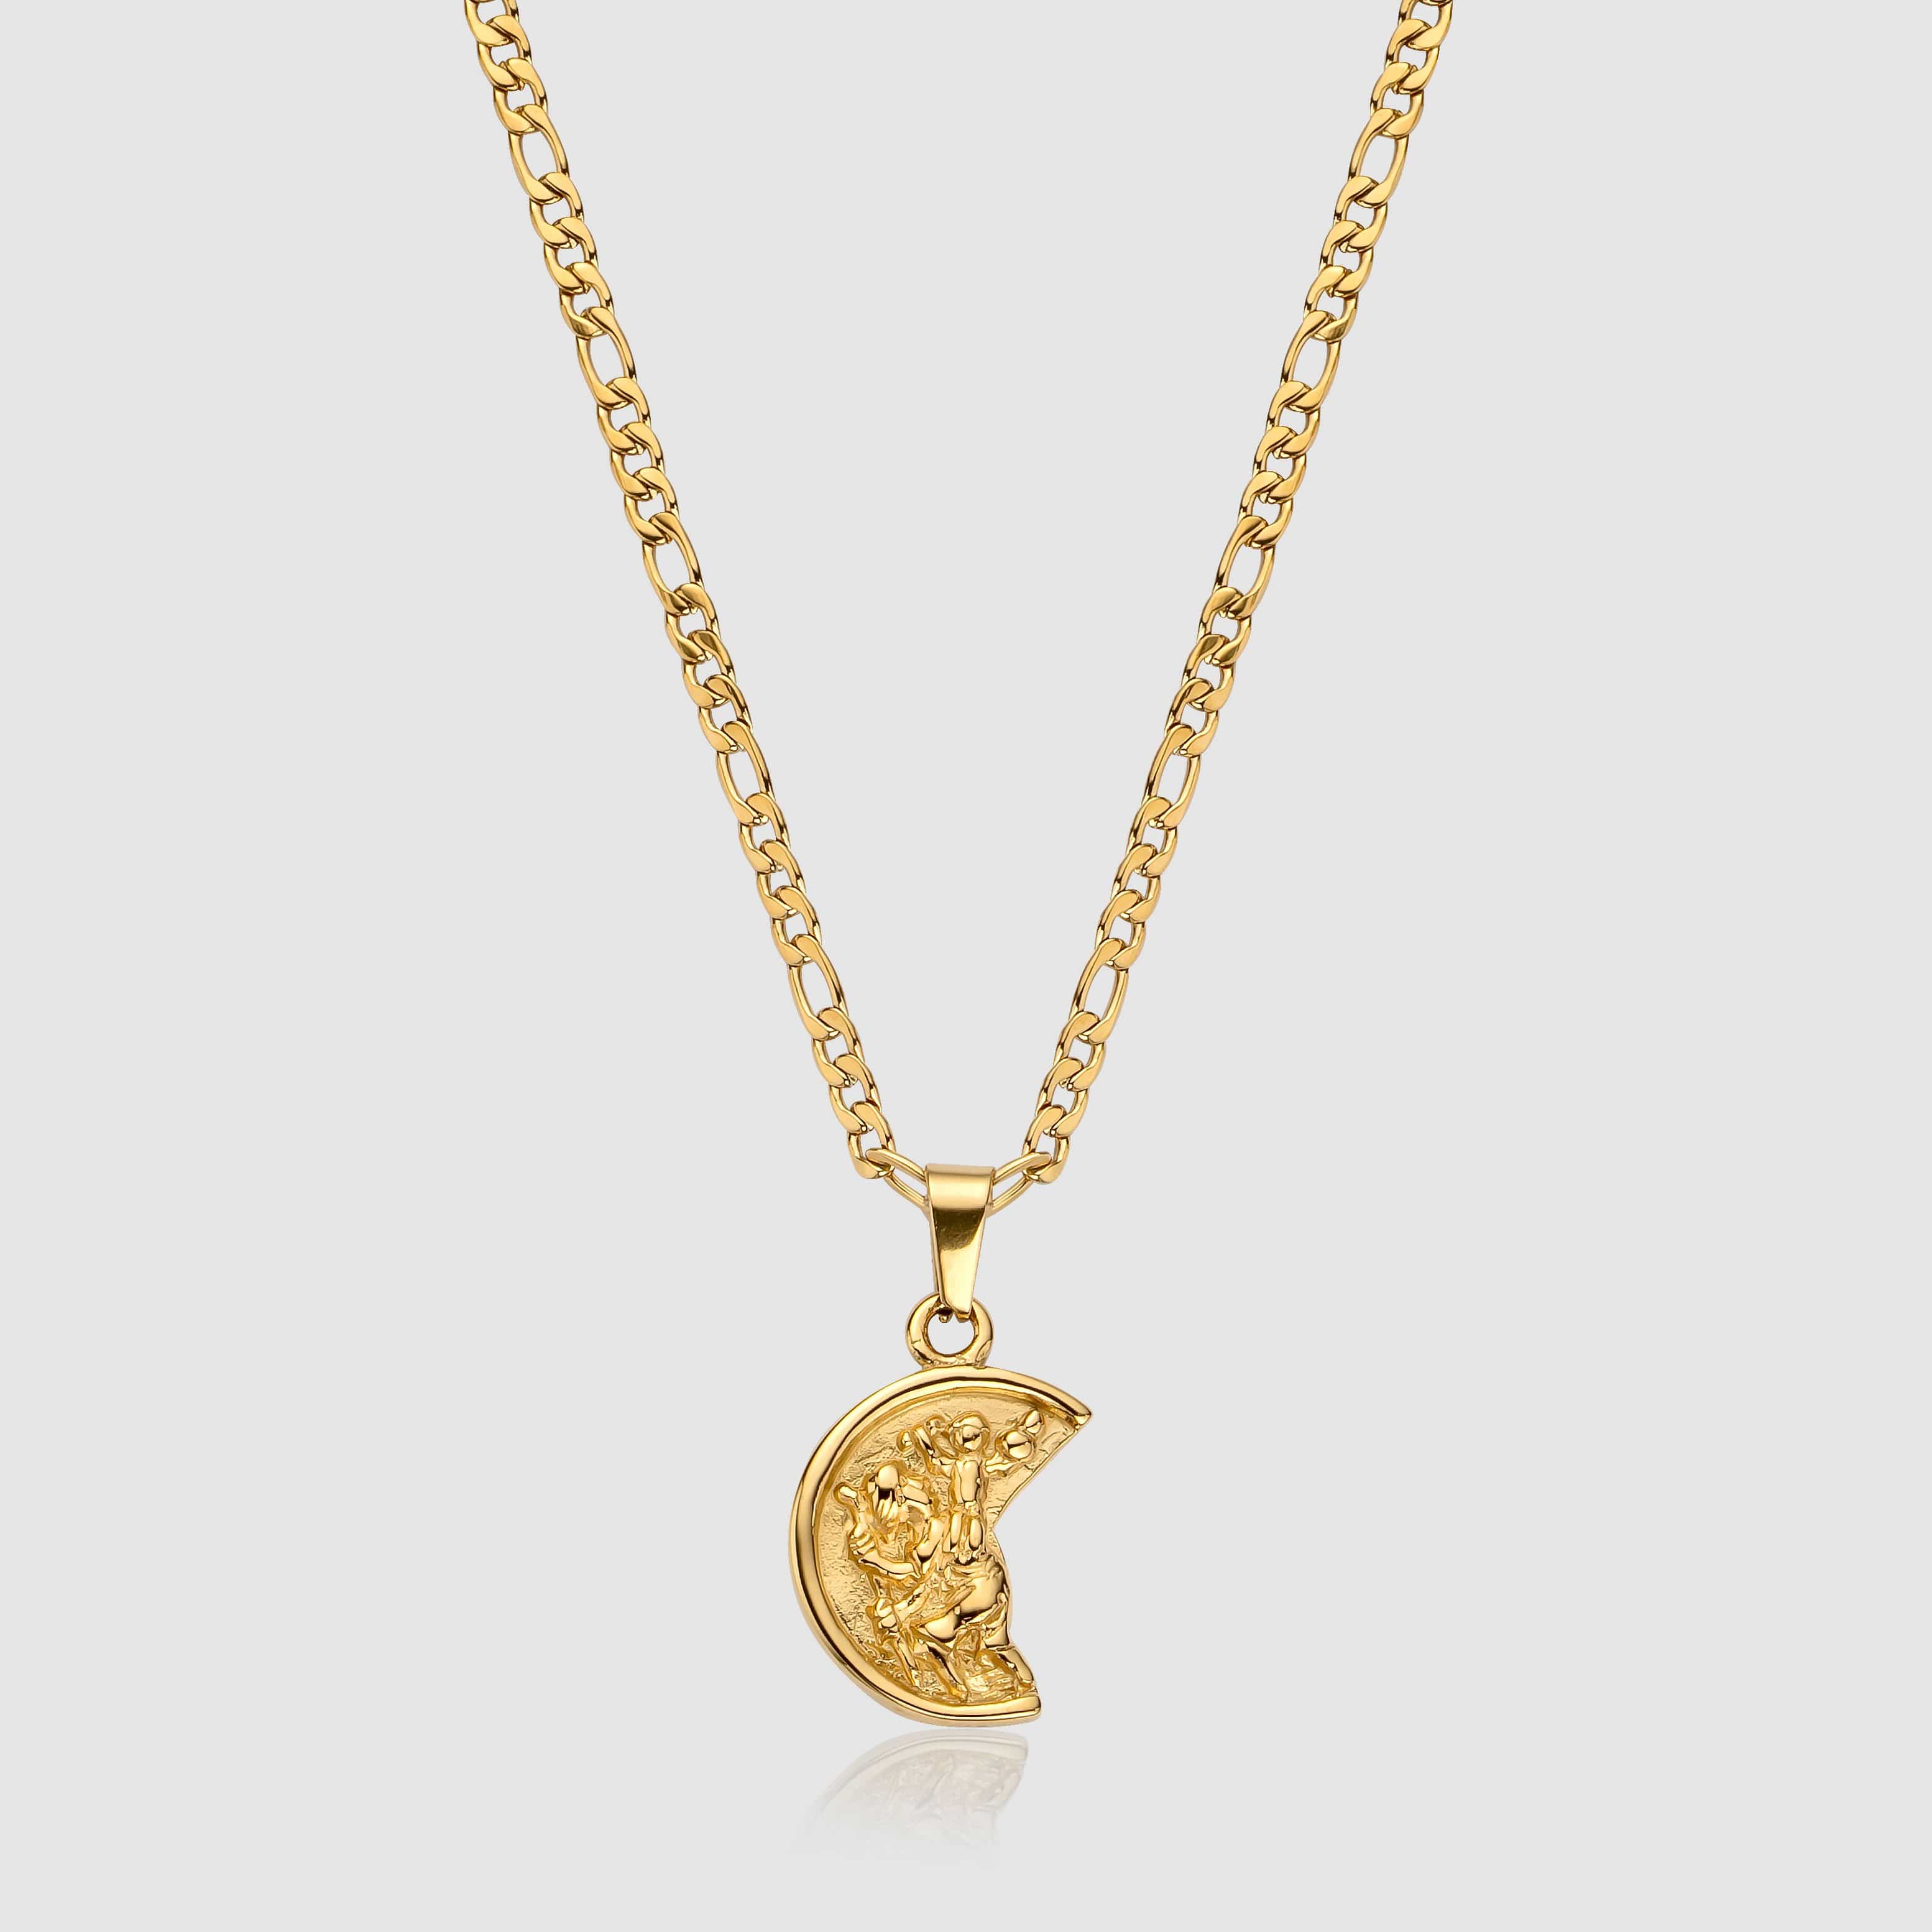 Gold St. Christopher Chain